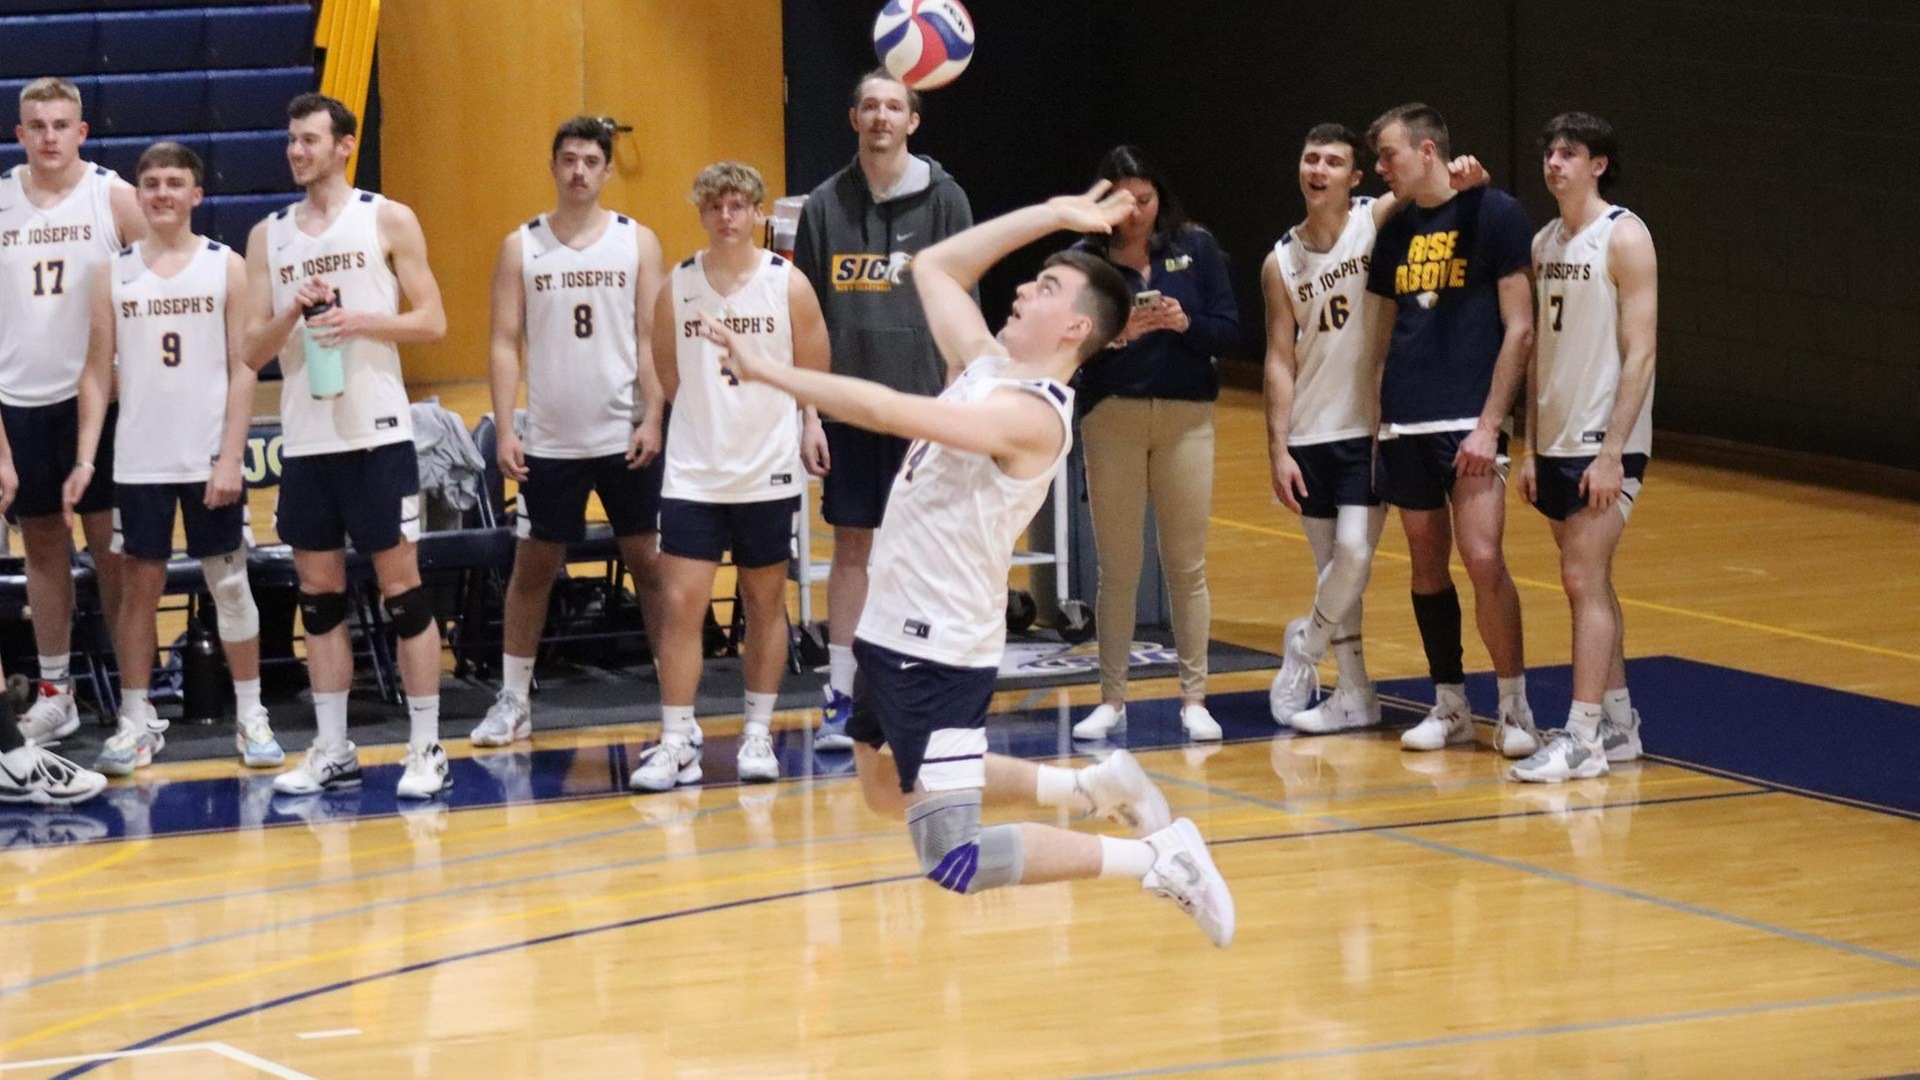 Men's Volleyball Remains Unbeaten in Skyline Play with Sweep of SJBK